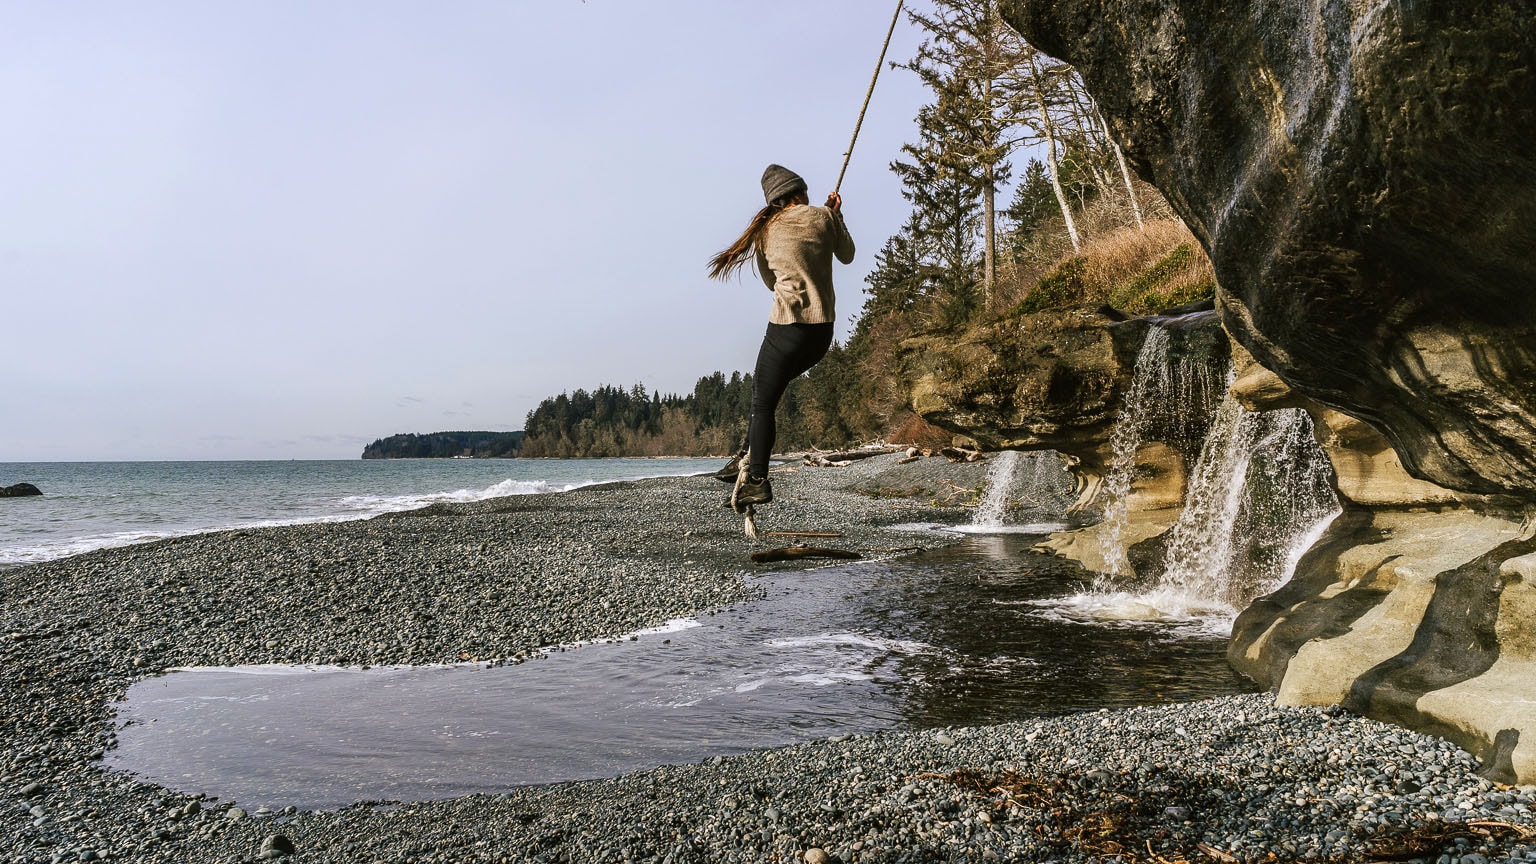 The author swings on a rope at Sandcut Beach.